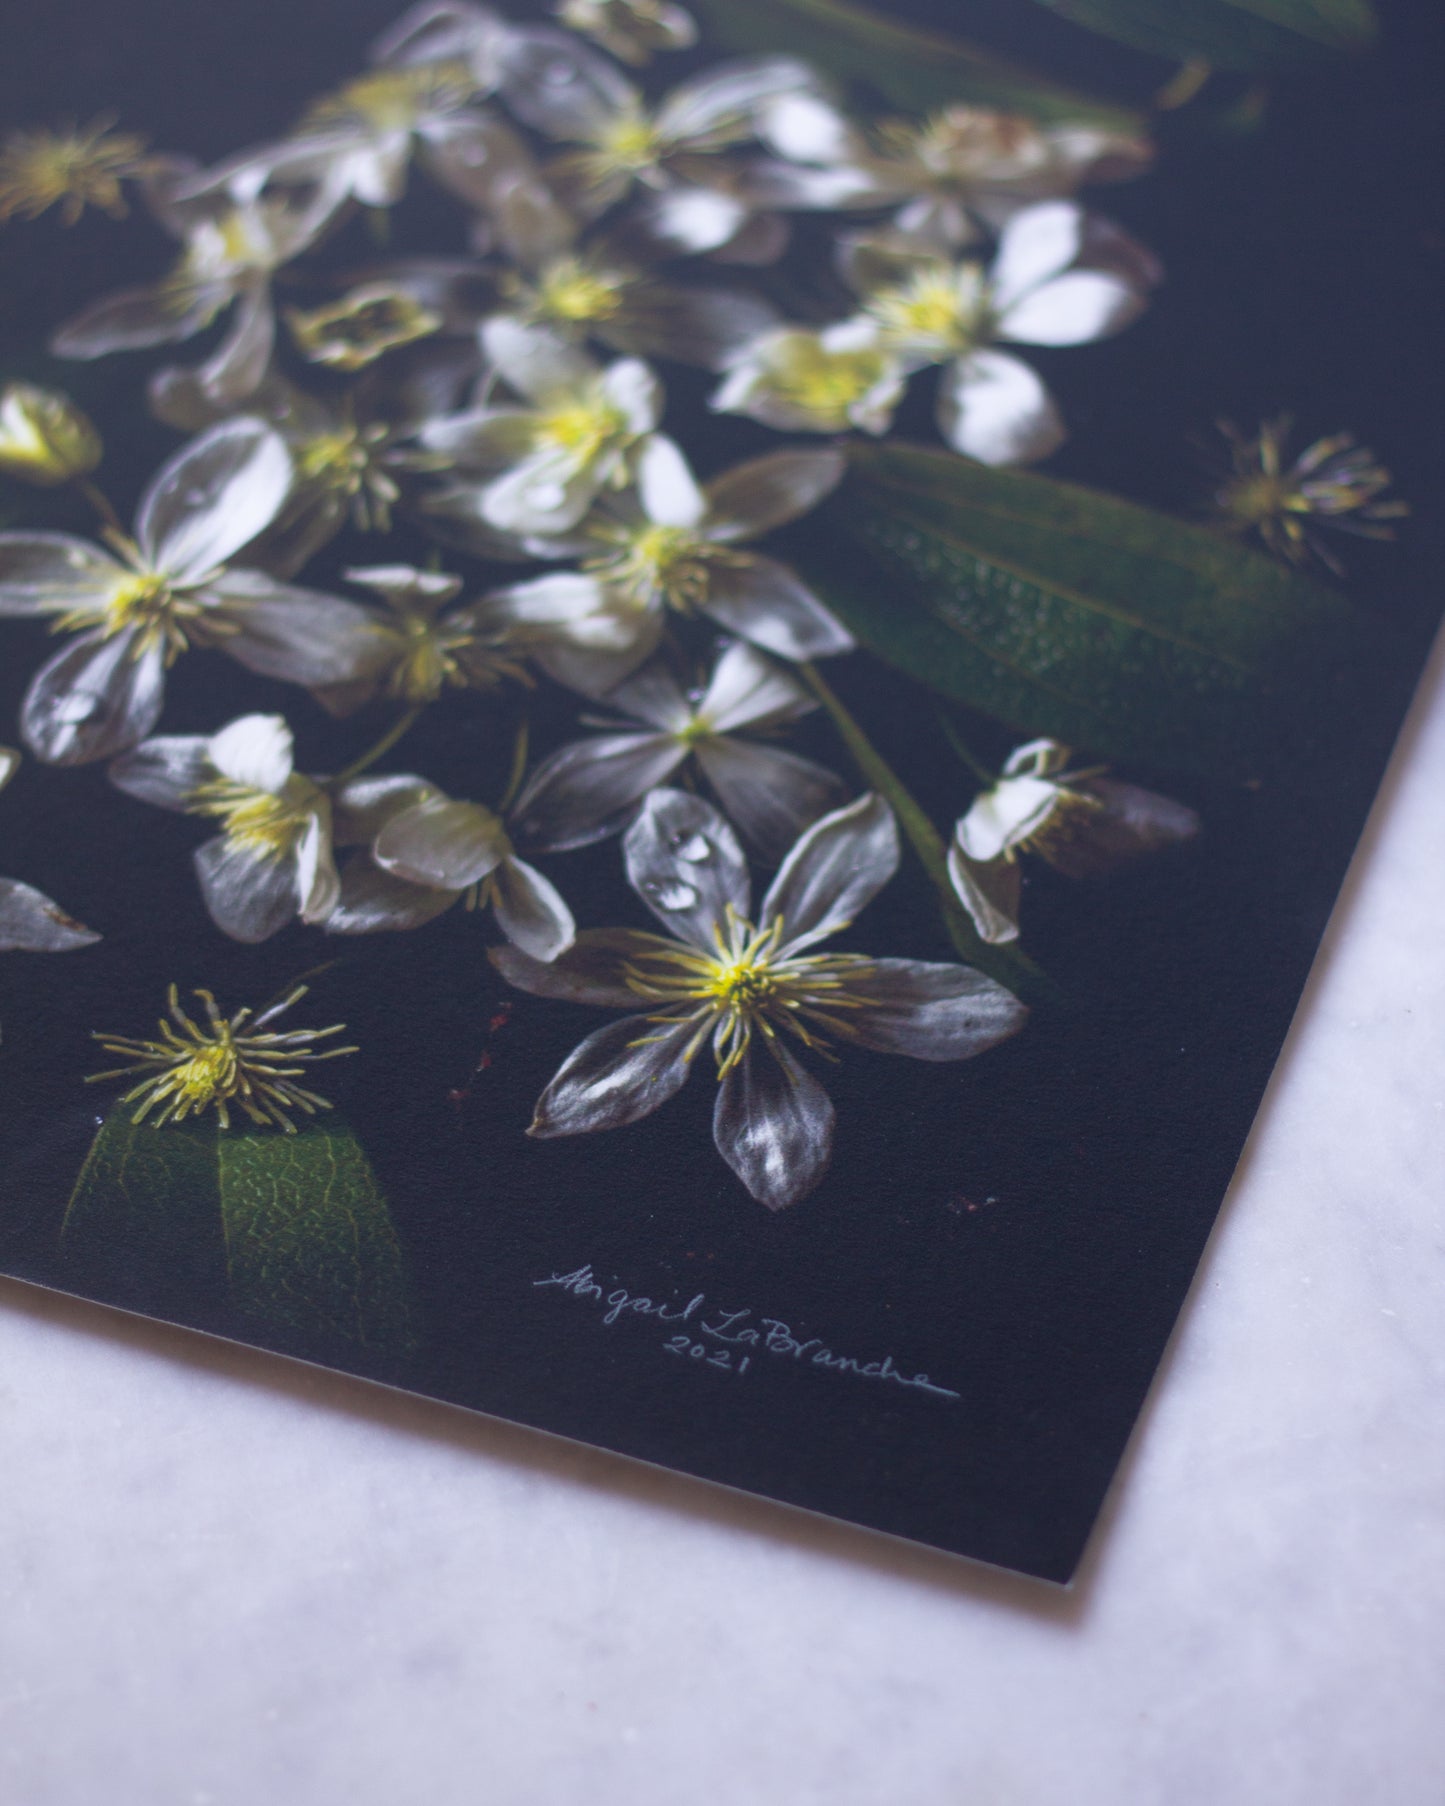 First Spring Narcissus Limited Edition Print